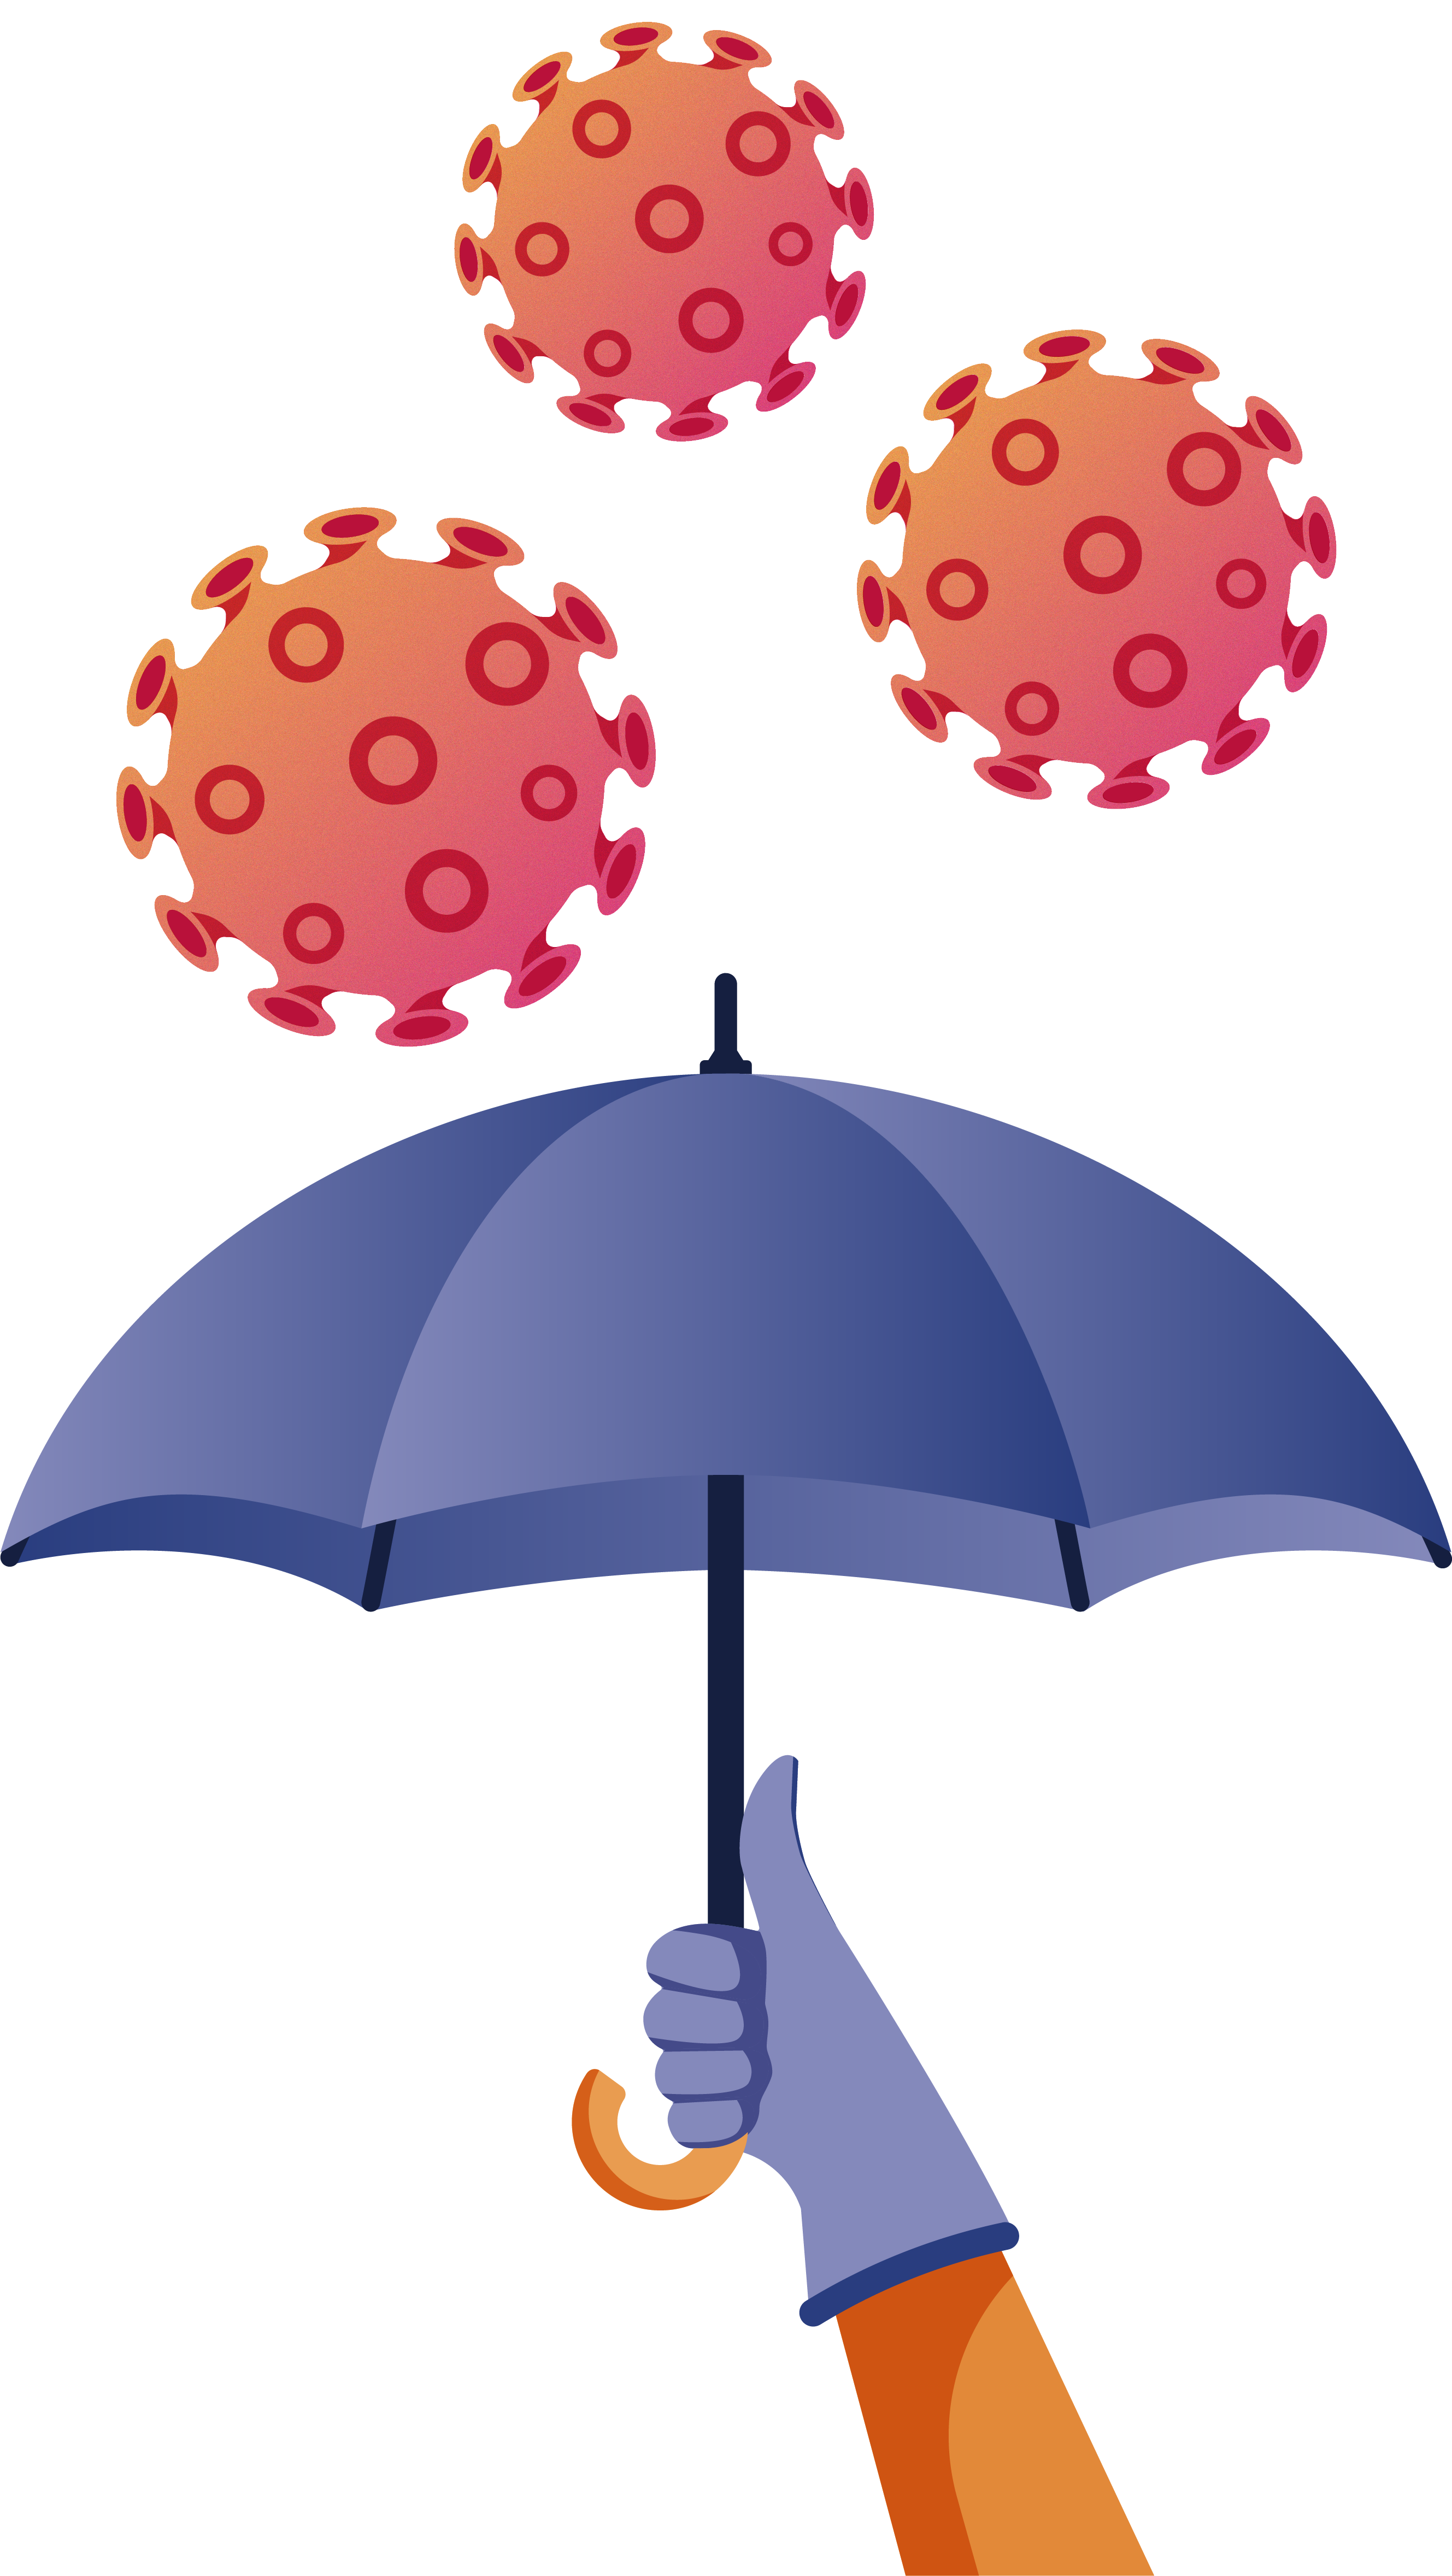 Illustration of three COVID-19 viruses hovering over a hand holding an umbrella